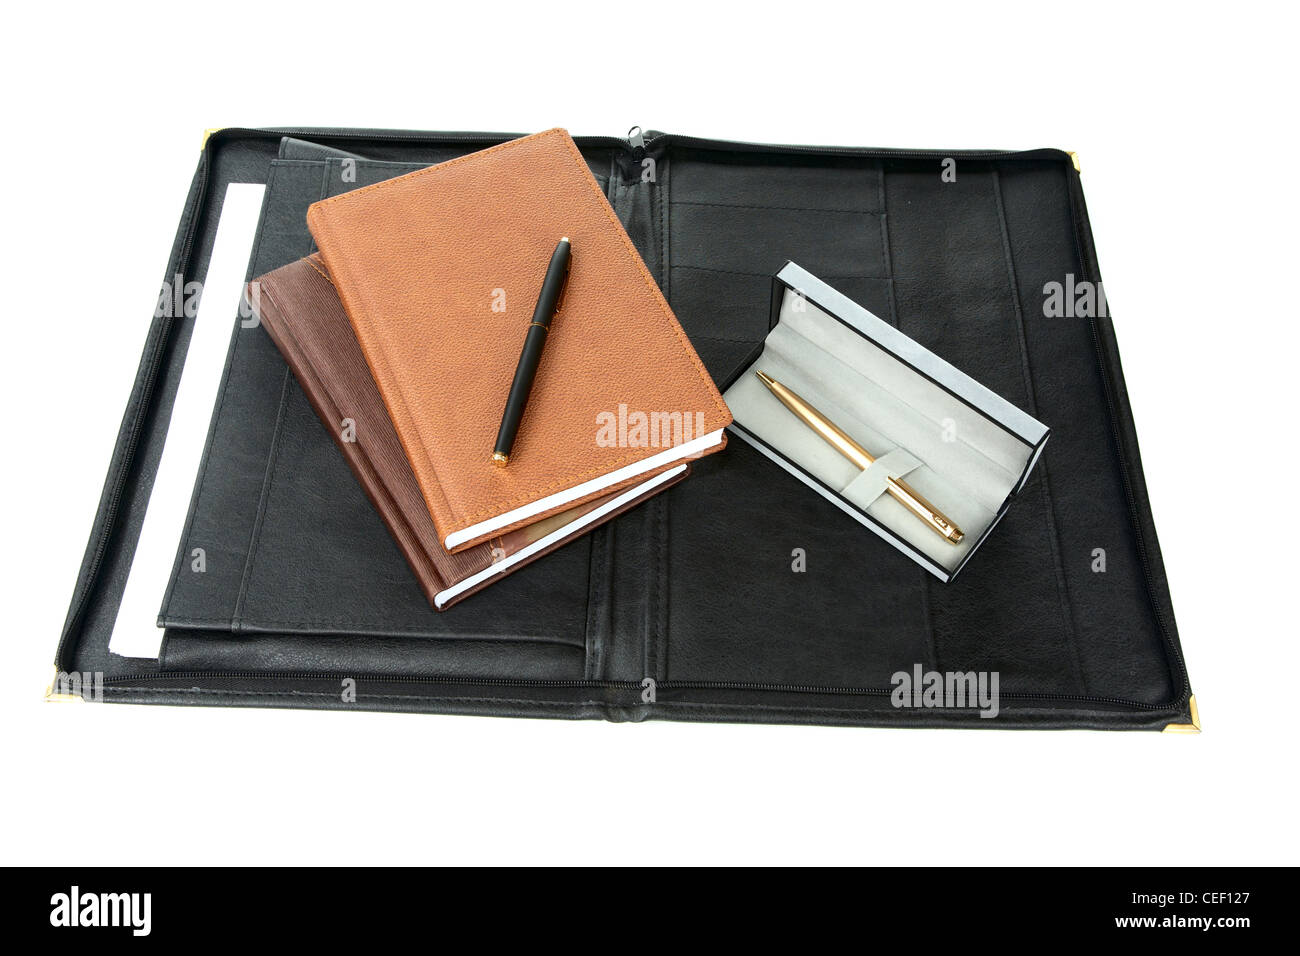 folder and organizers with pen on a white background Stock Photo